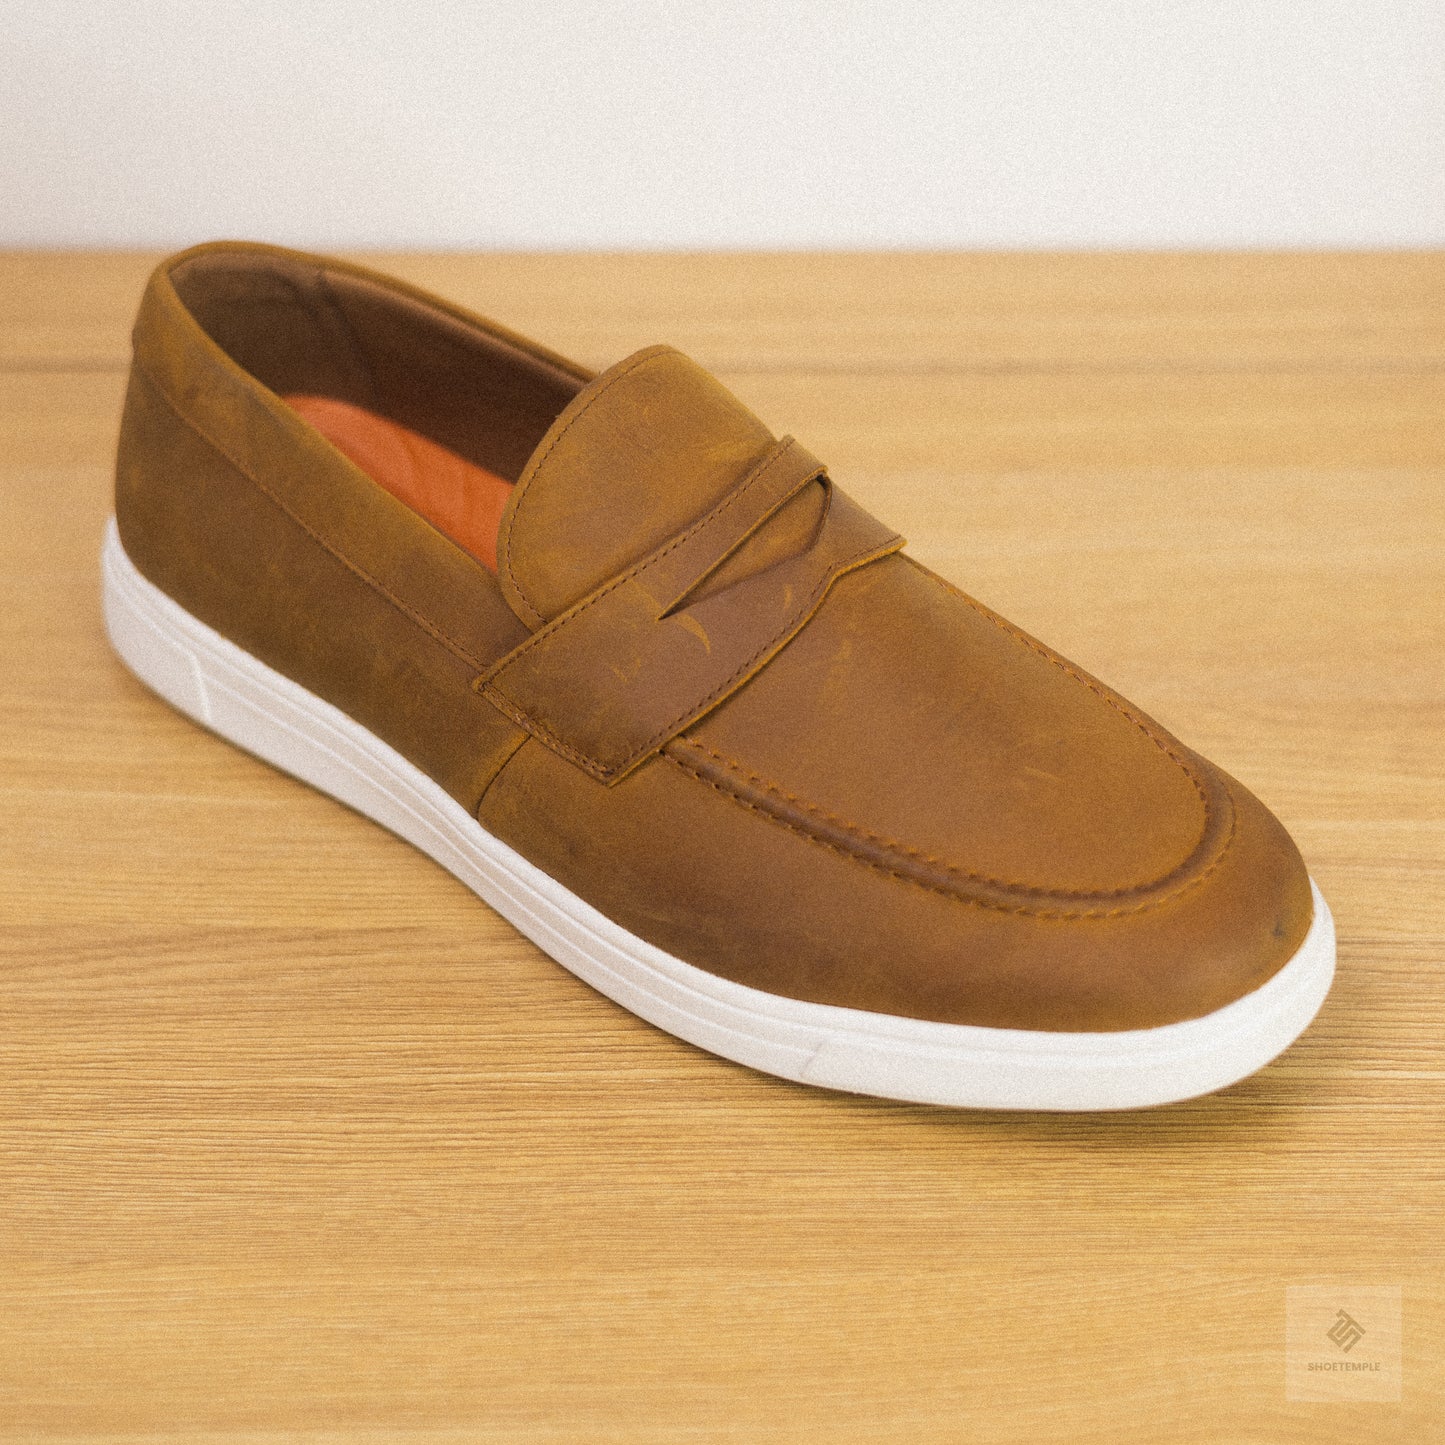 Hush Puppies Penny Loafers